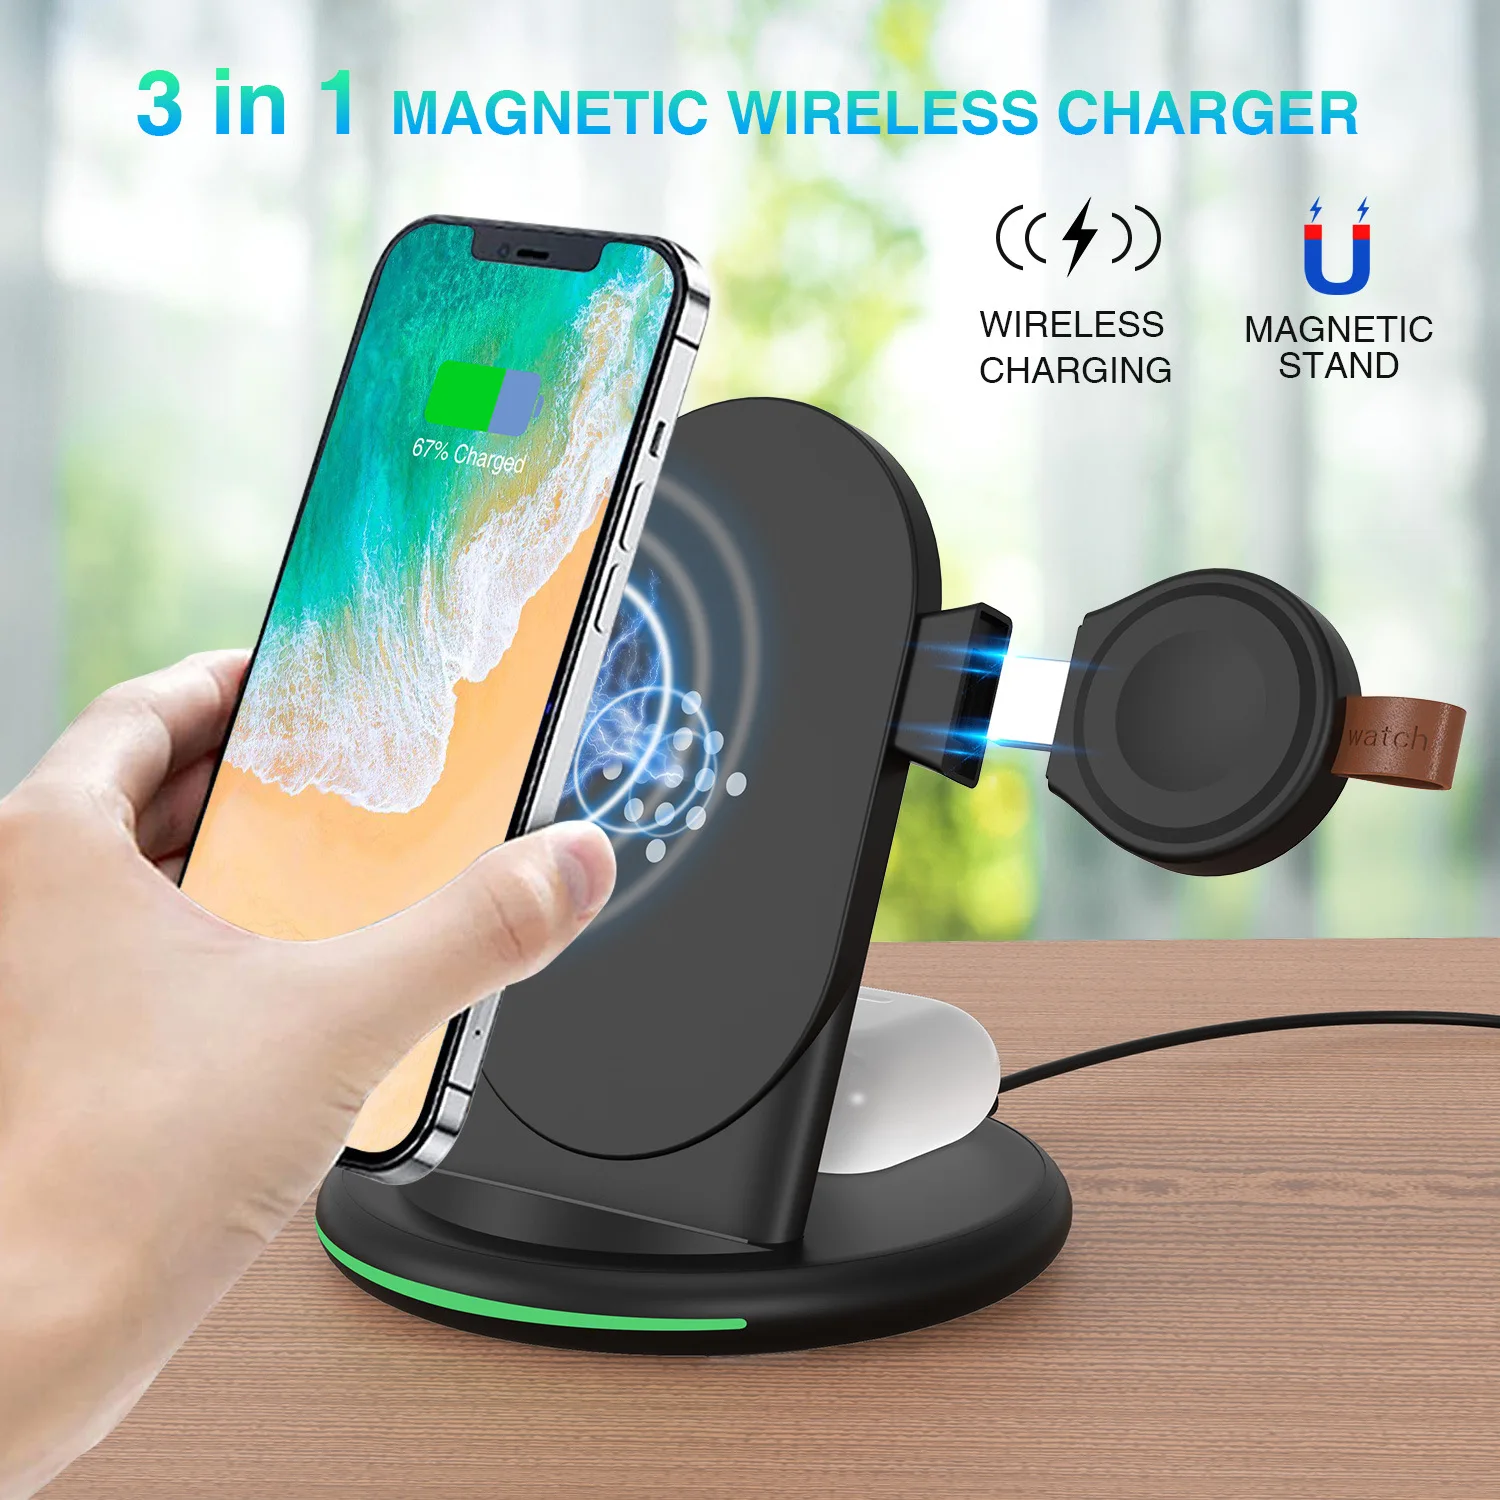 3 in 1 Magnetic Wireless Charger 15W Stand Fast Wireless Charging  for Samsung Xiaomi  Huawei IPhone Apple watch